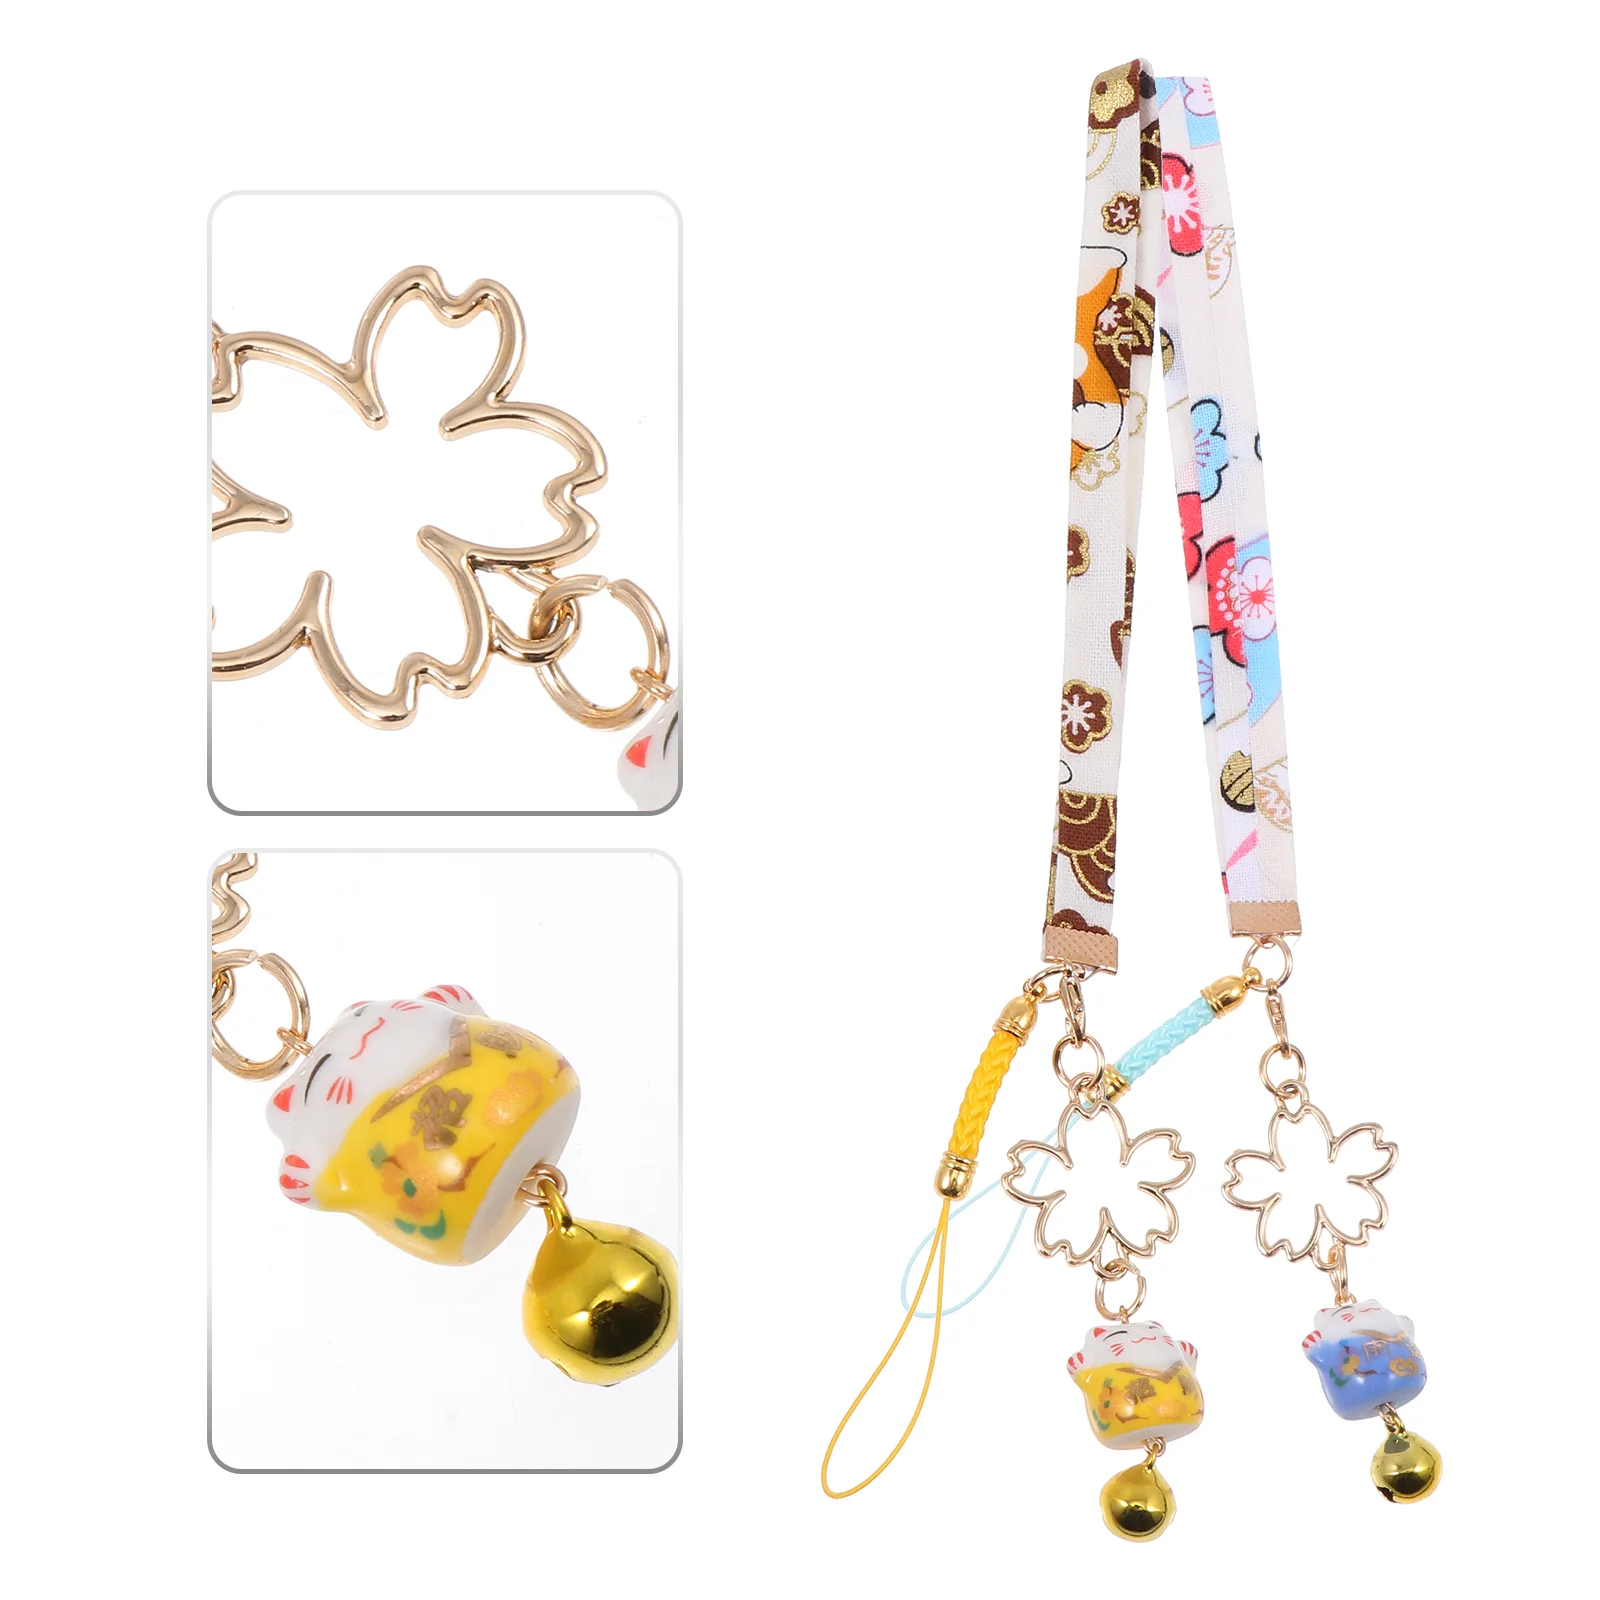 

Lanyard Strap Hanging Charm Rope Chain Charms Wrist Pendant Cat Cell Beaded Keychain Lanyards Bell Universal Fortune Cellphone